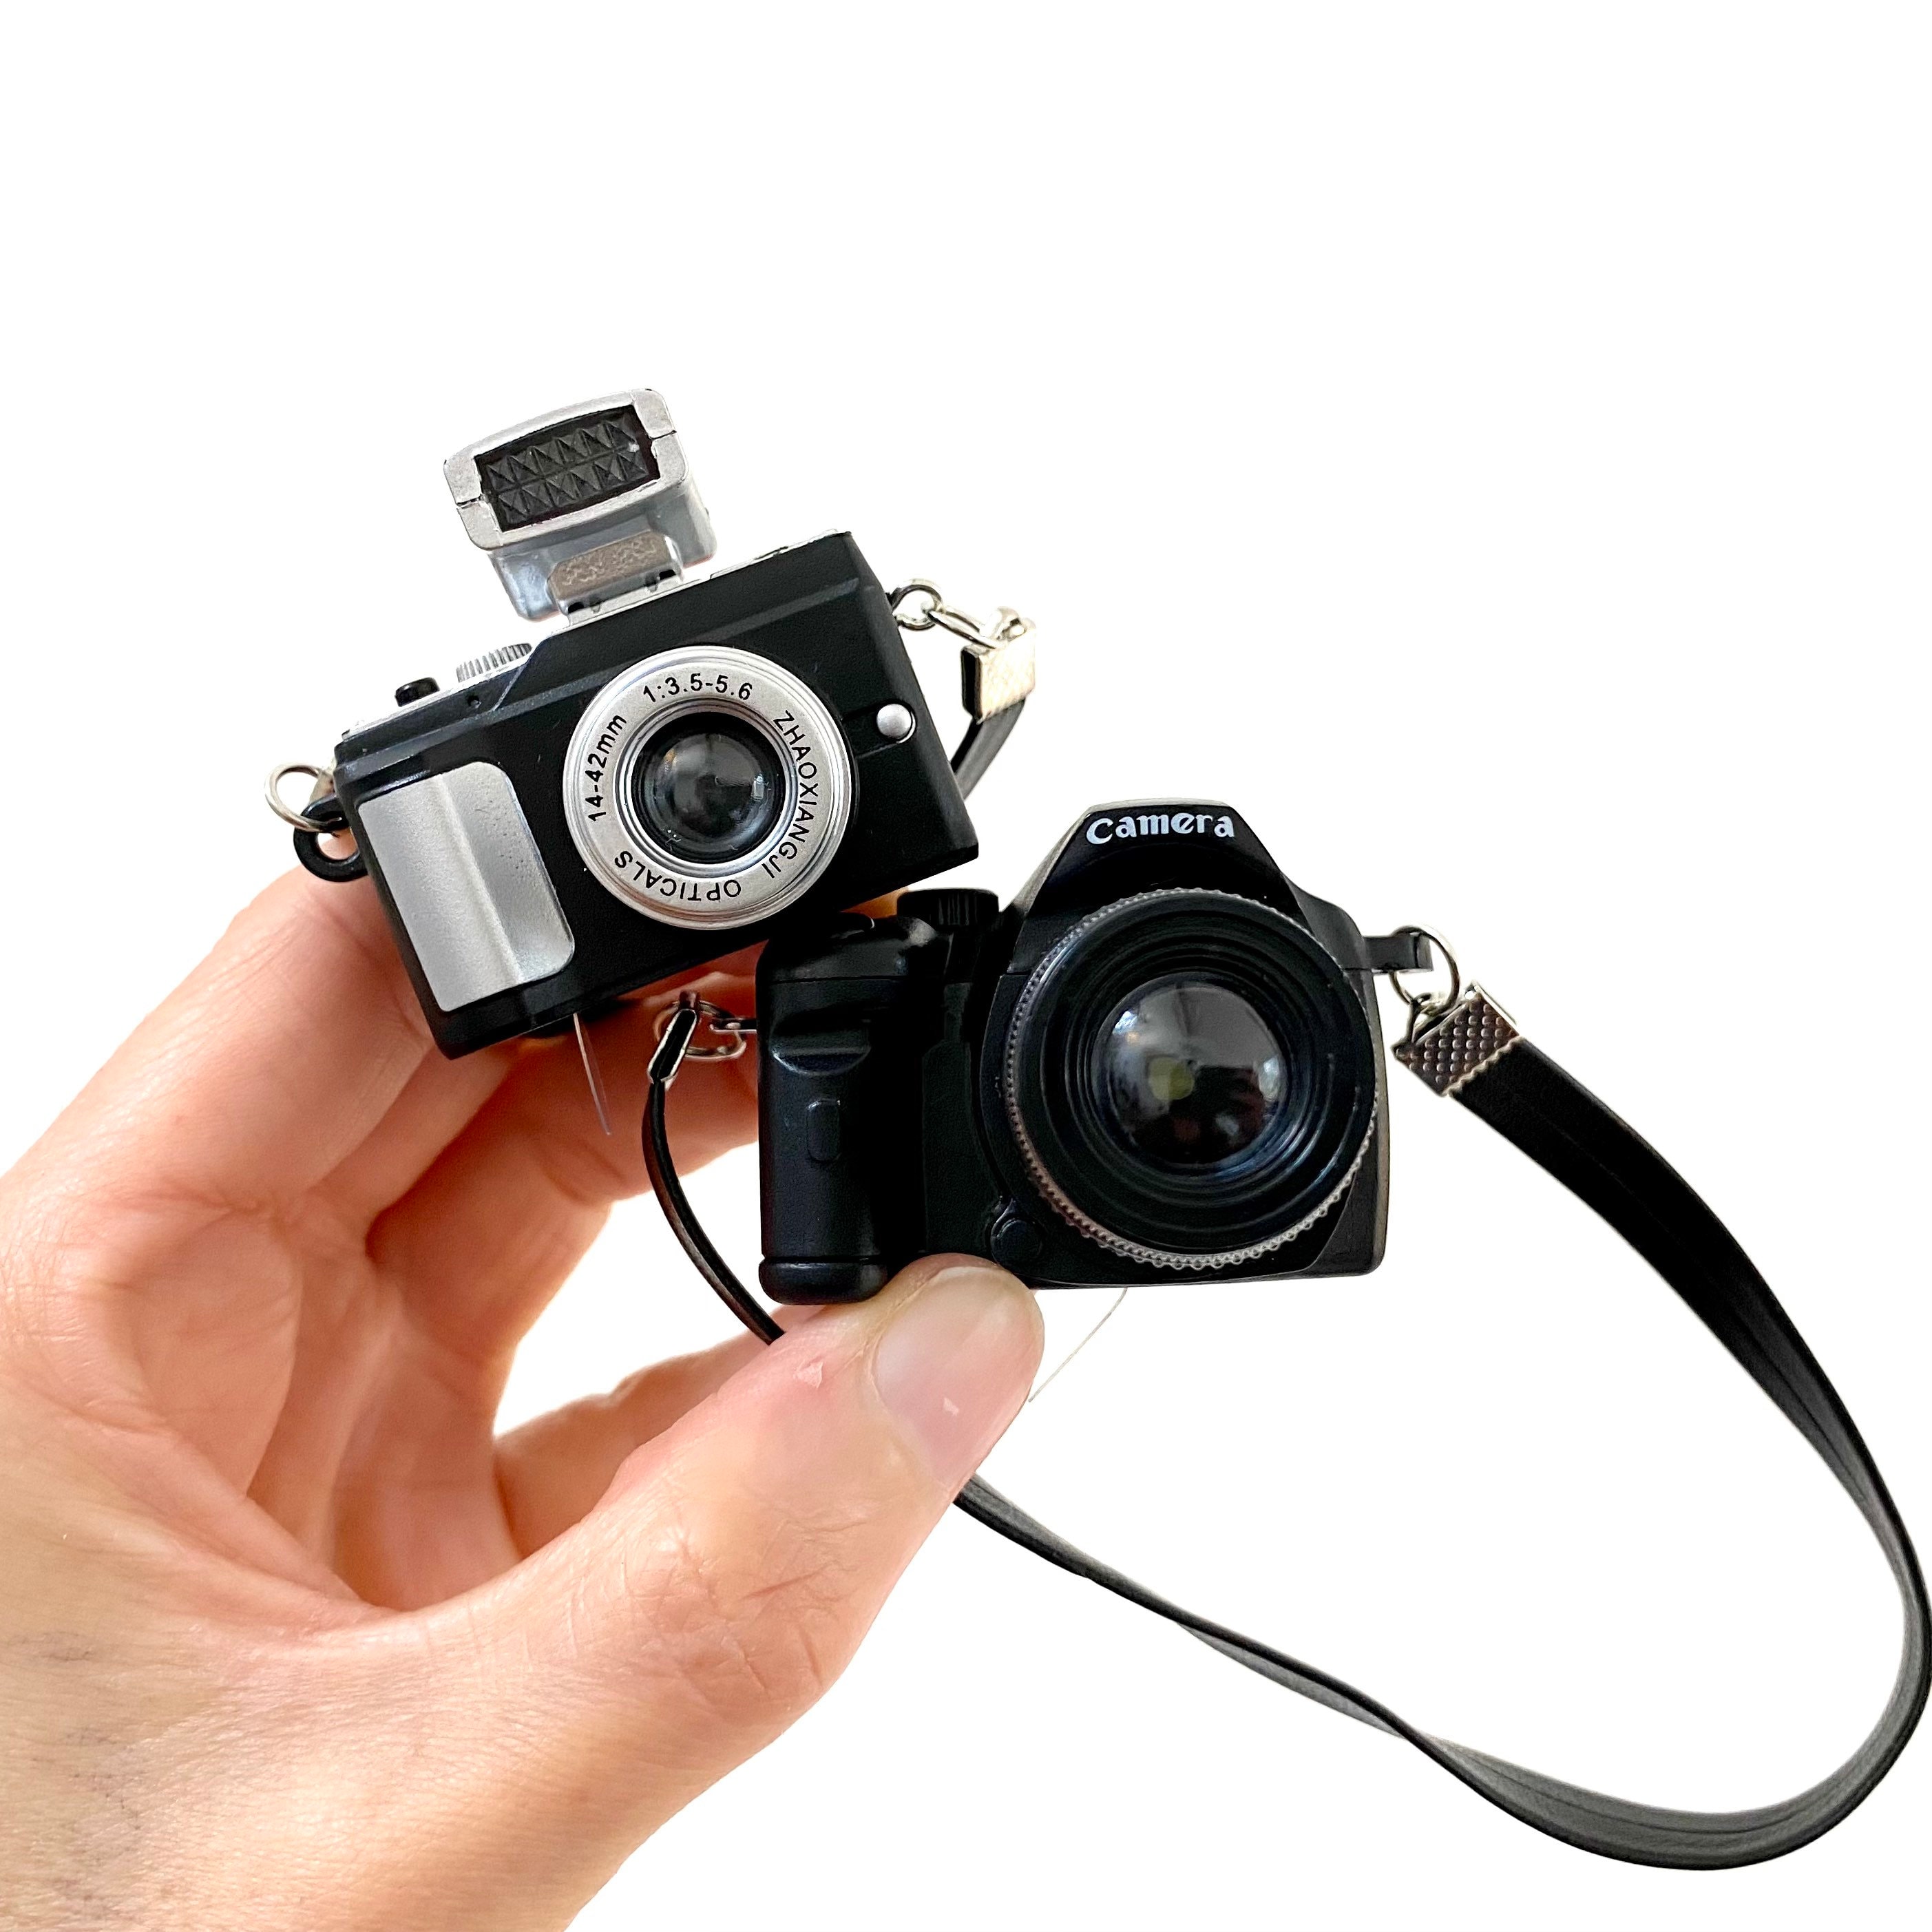 Miniature Camera Realistic Canon Camera 1/6 Scale With Working Flash Lights  up With Sound Blythe Doll Toy Accessory UK Seller 